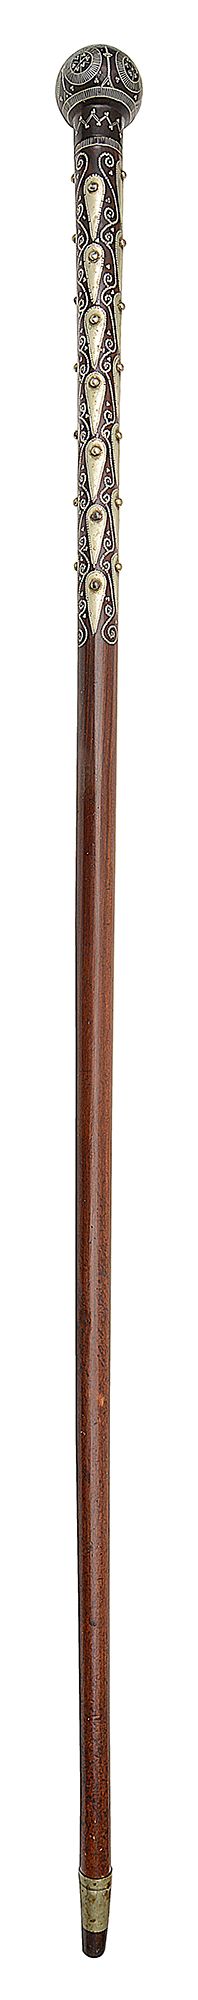 A 19th century Russian silver pique inlaid hardwood walking cane - Image 2 of 2